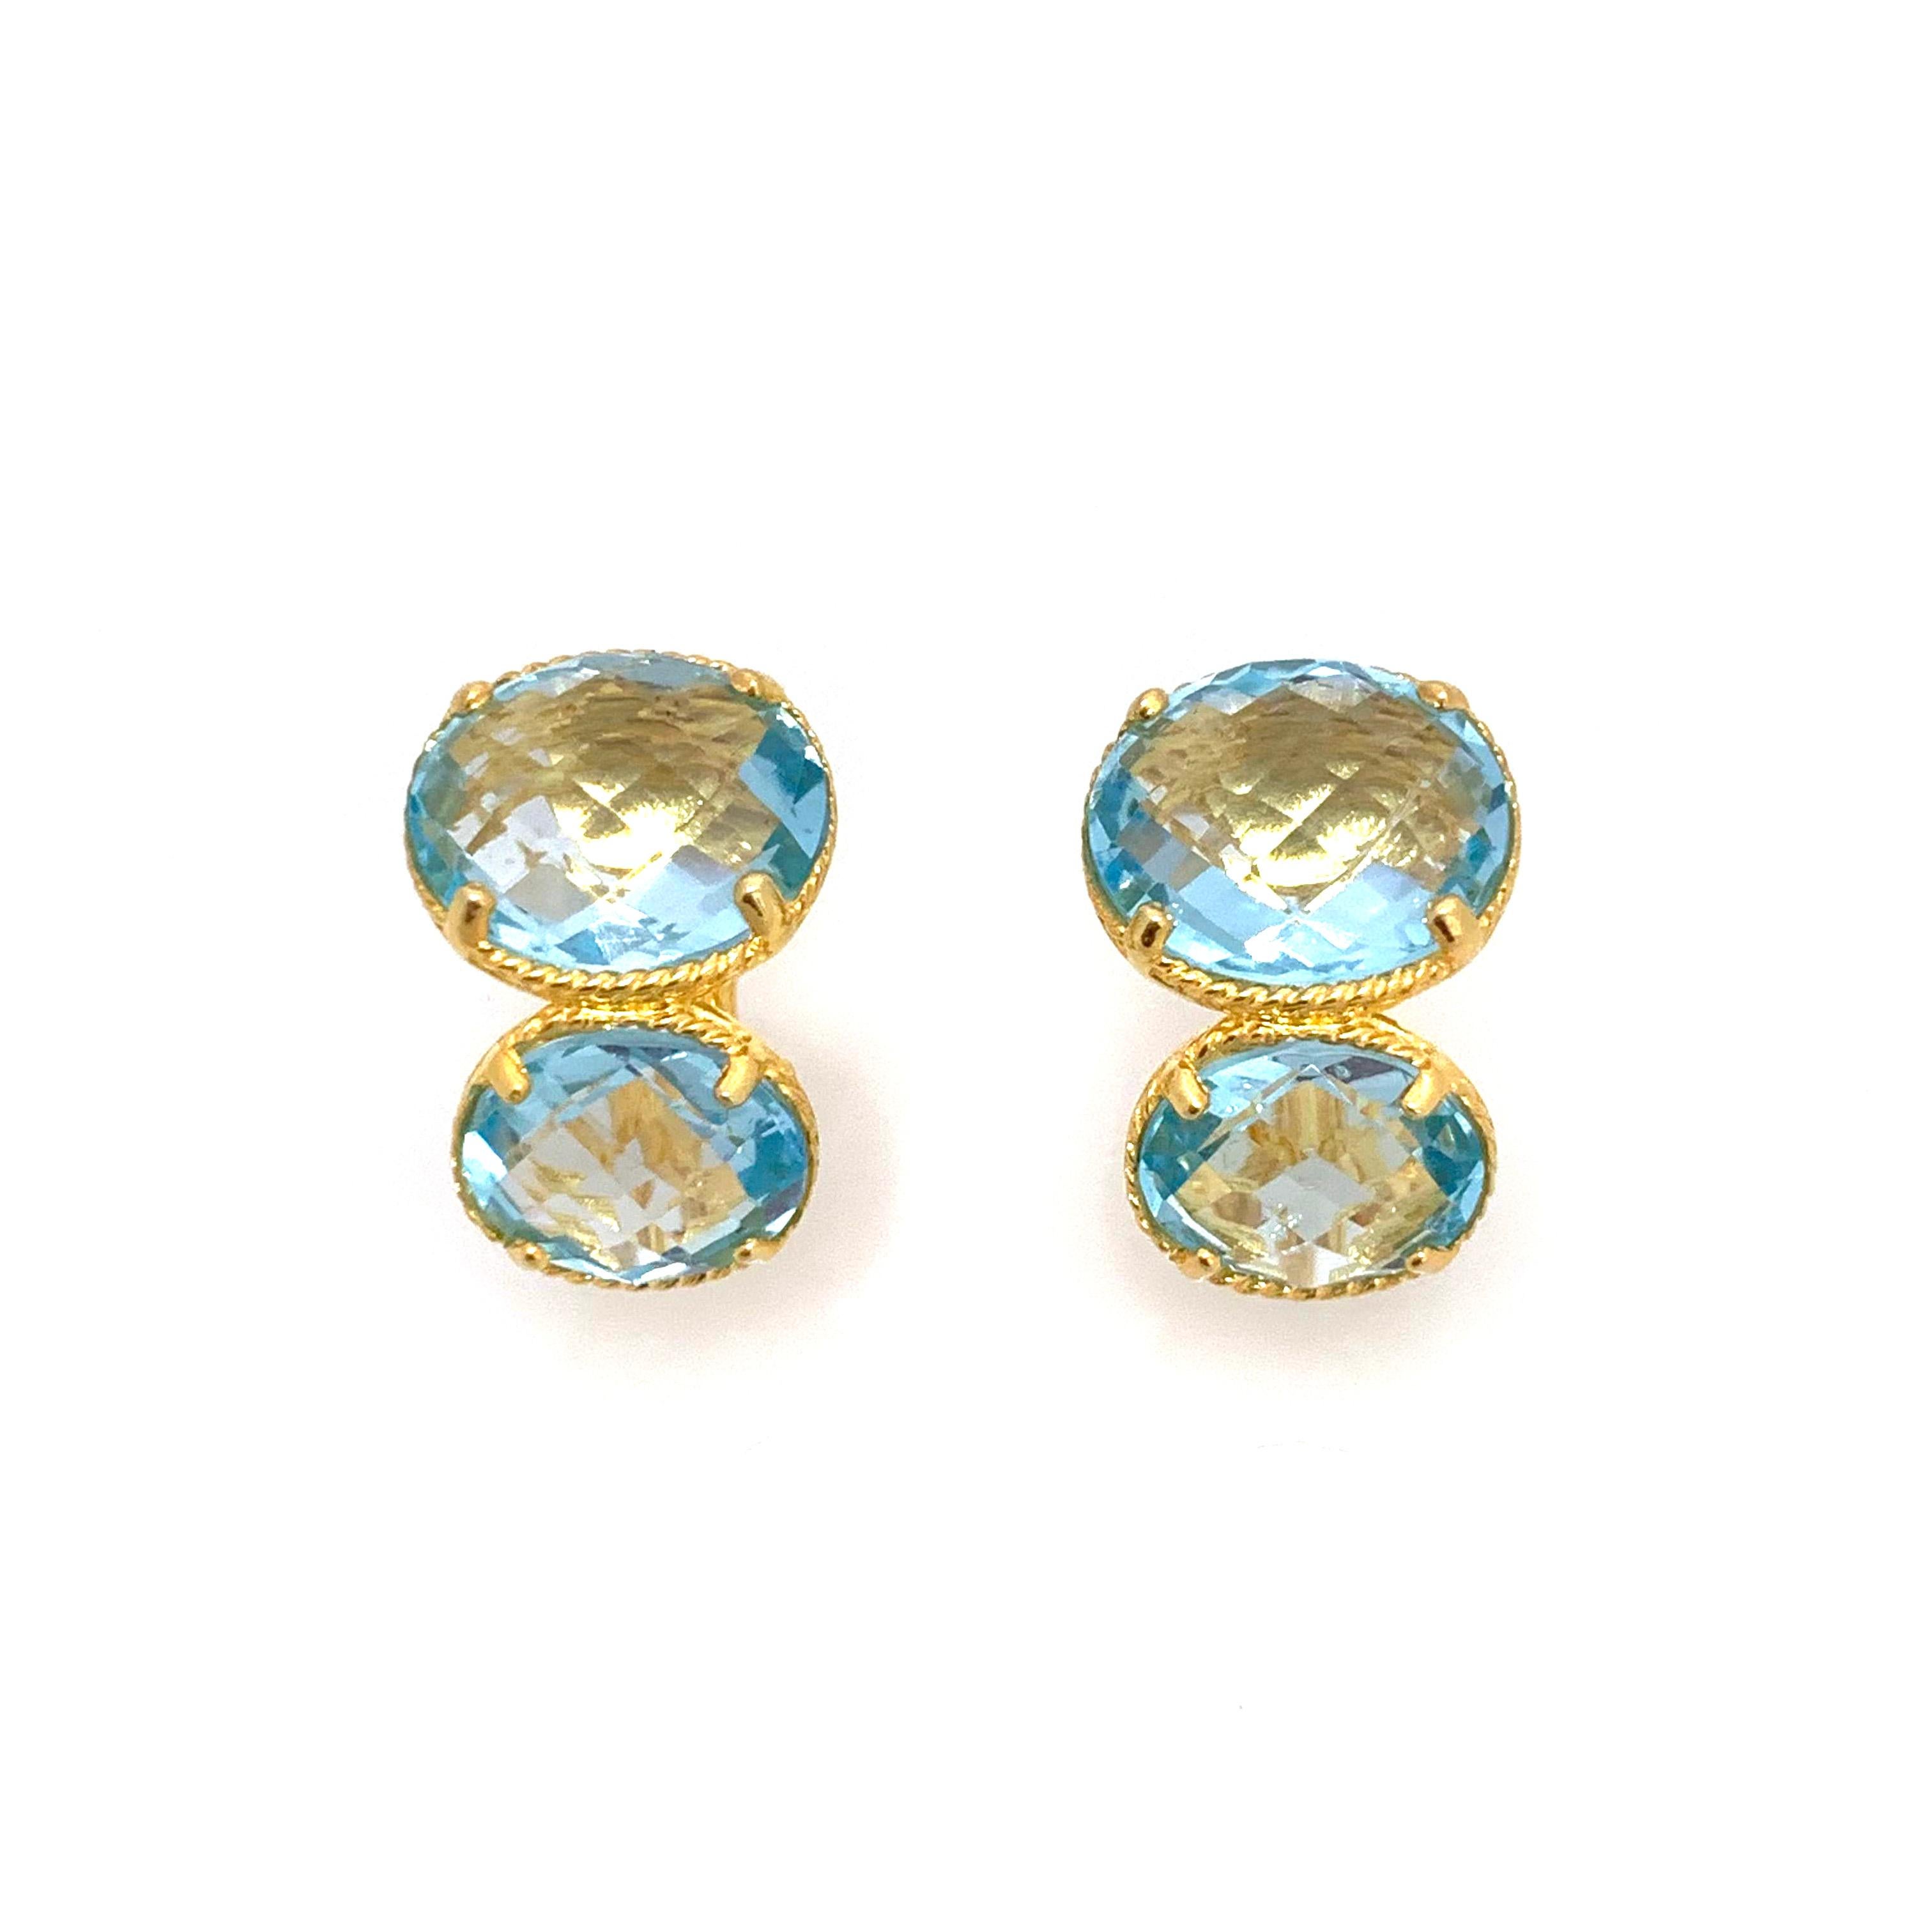 Stunning Bijoux Num Double Oval Briolette-cut Blue Topaz Vermeil Earrings. 

The earrings feature 4 beautiful briolette-cut oval blue topaz, handset in 18k gold vermeil over sterling silver.  Straight post back with omega clip backing. The earrings